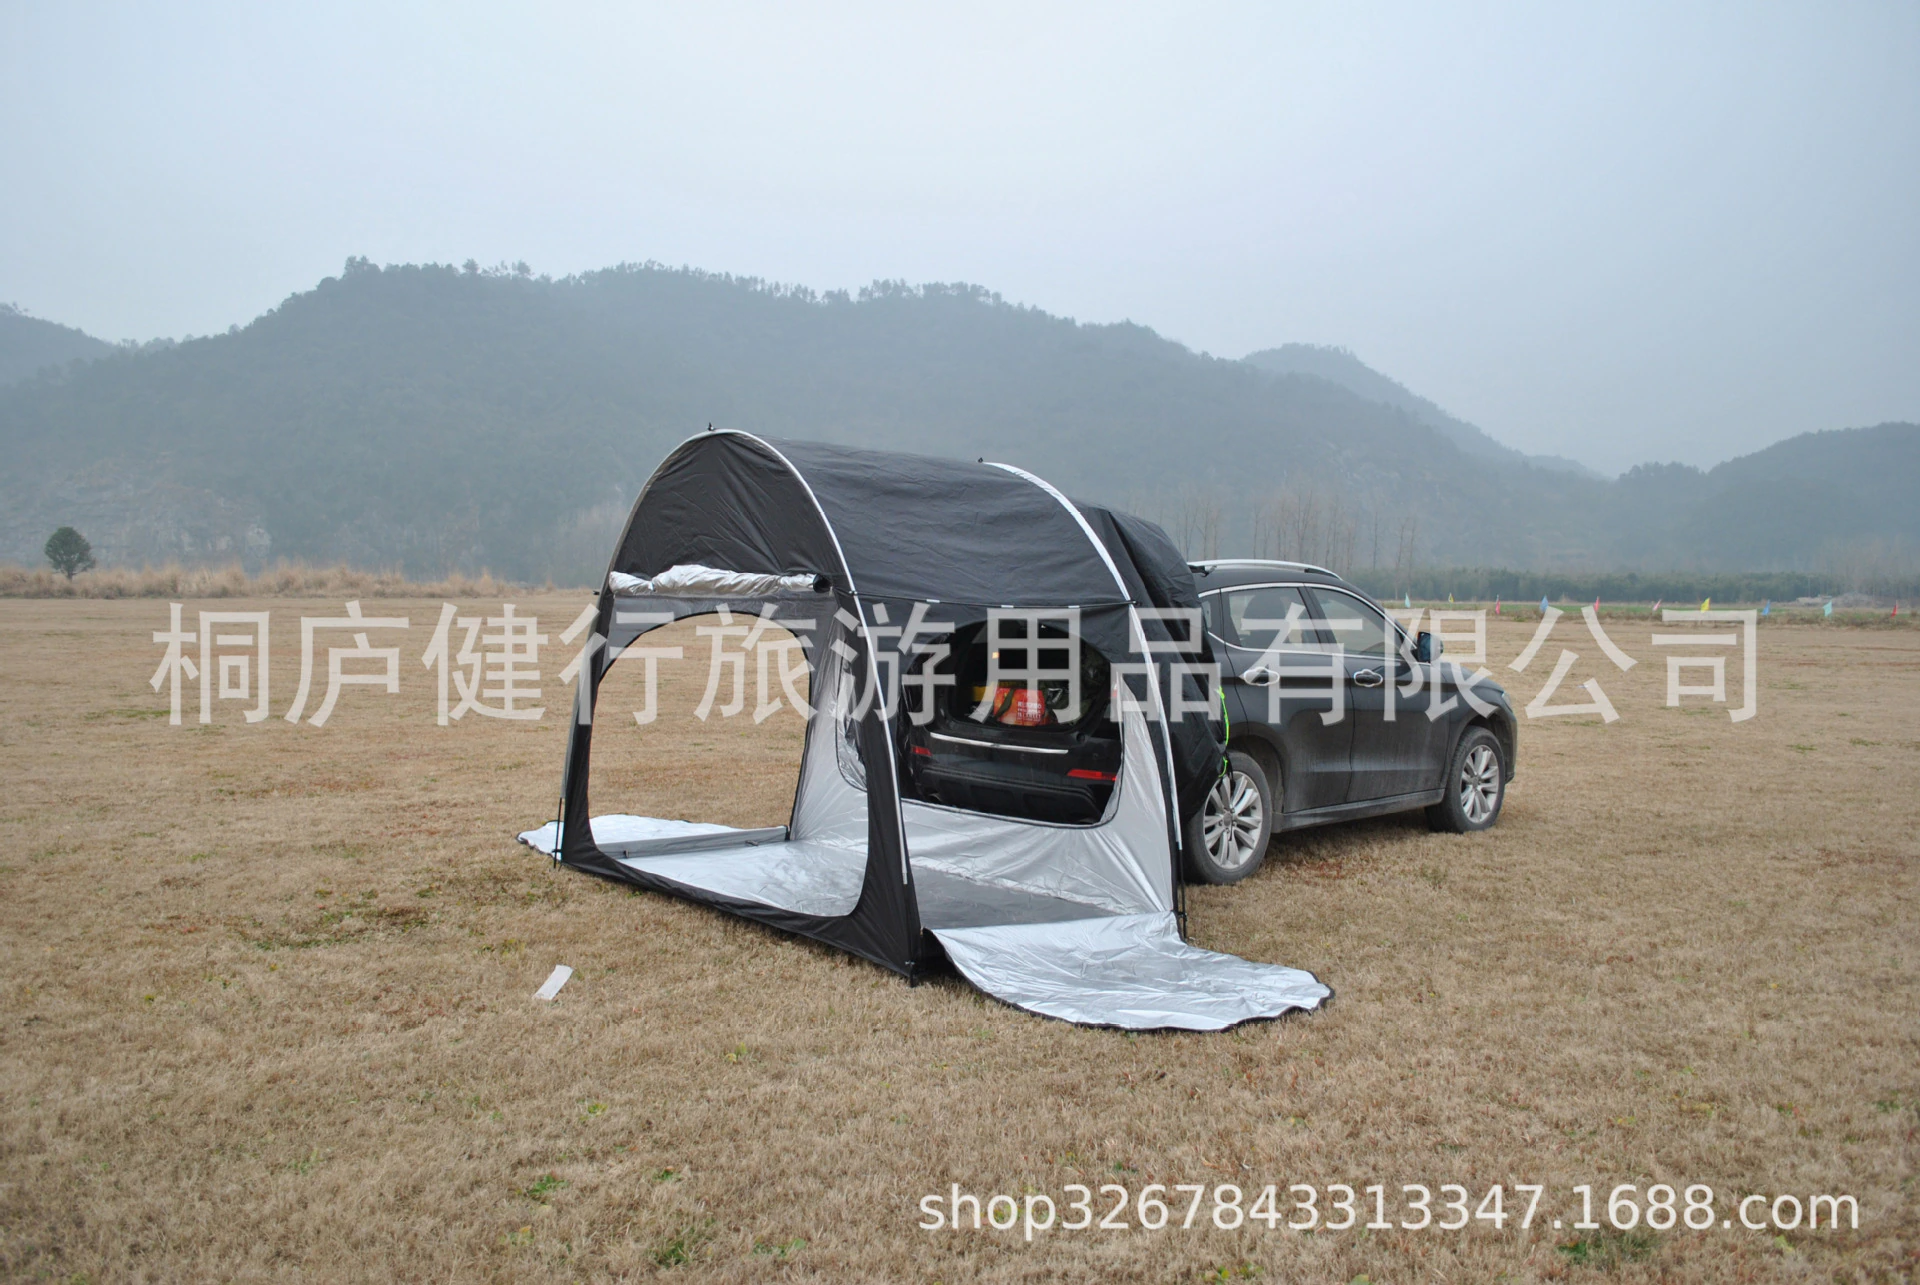 Cheap Goat Tents Outdoor Car Trunk Tent Sunshade Rainproof Tailgate Shade Awning Tent For SUV Car Self Driving Tour Barbecue Camping Tool